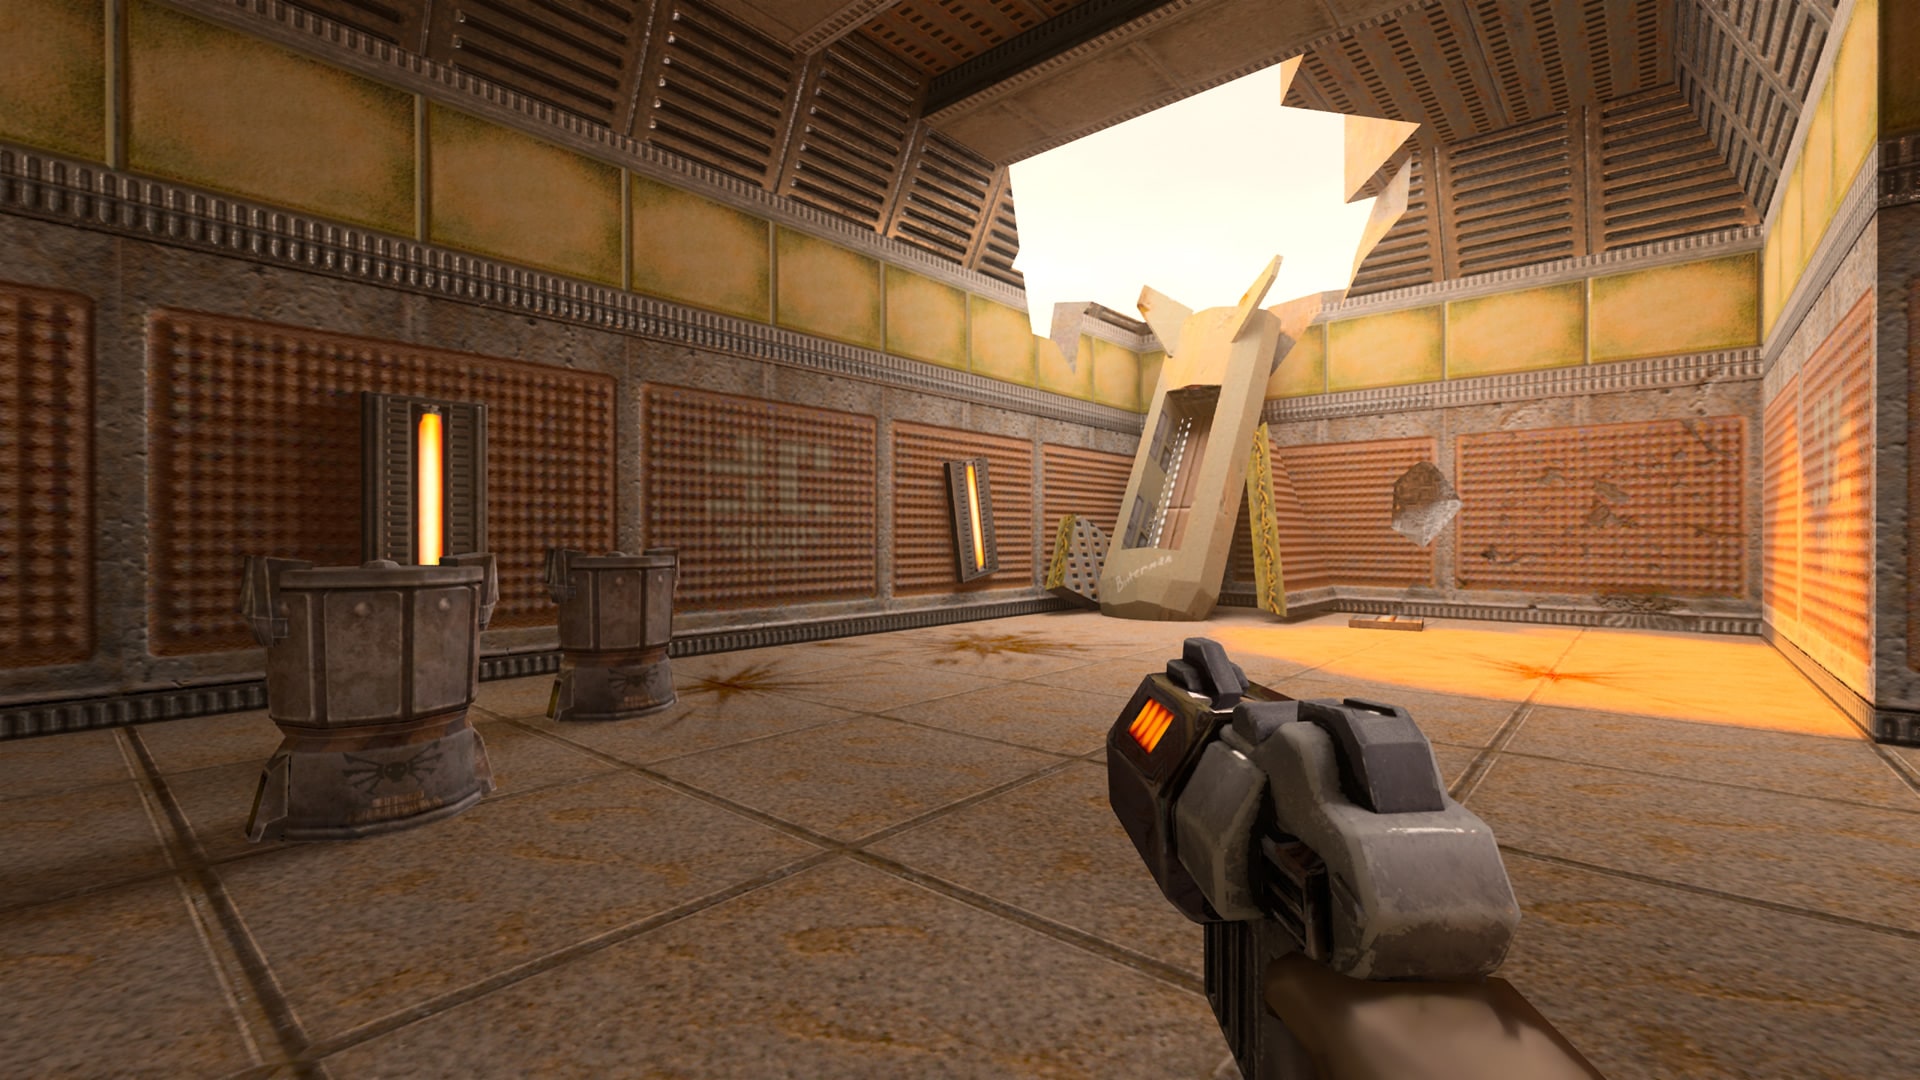 Nvidia GeForce 460.89 WHQL, drivers that add support for Vulkan RayTracing in Quake II RTX